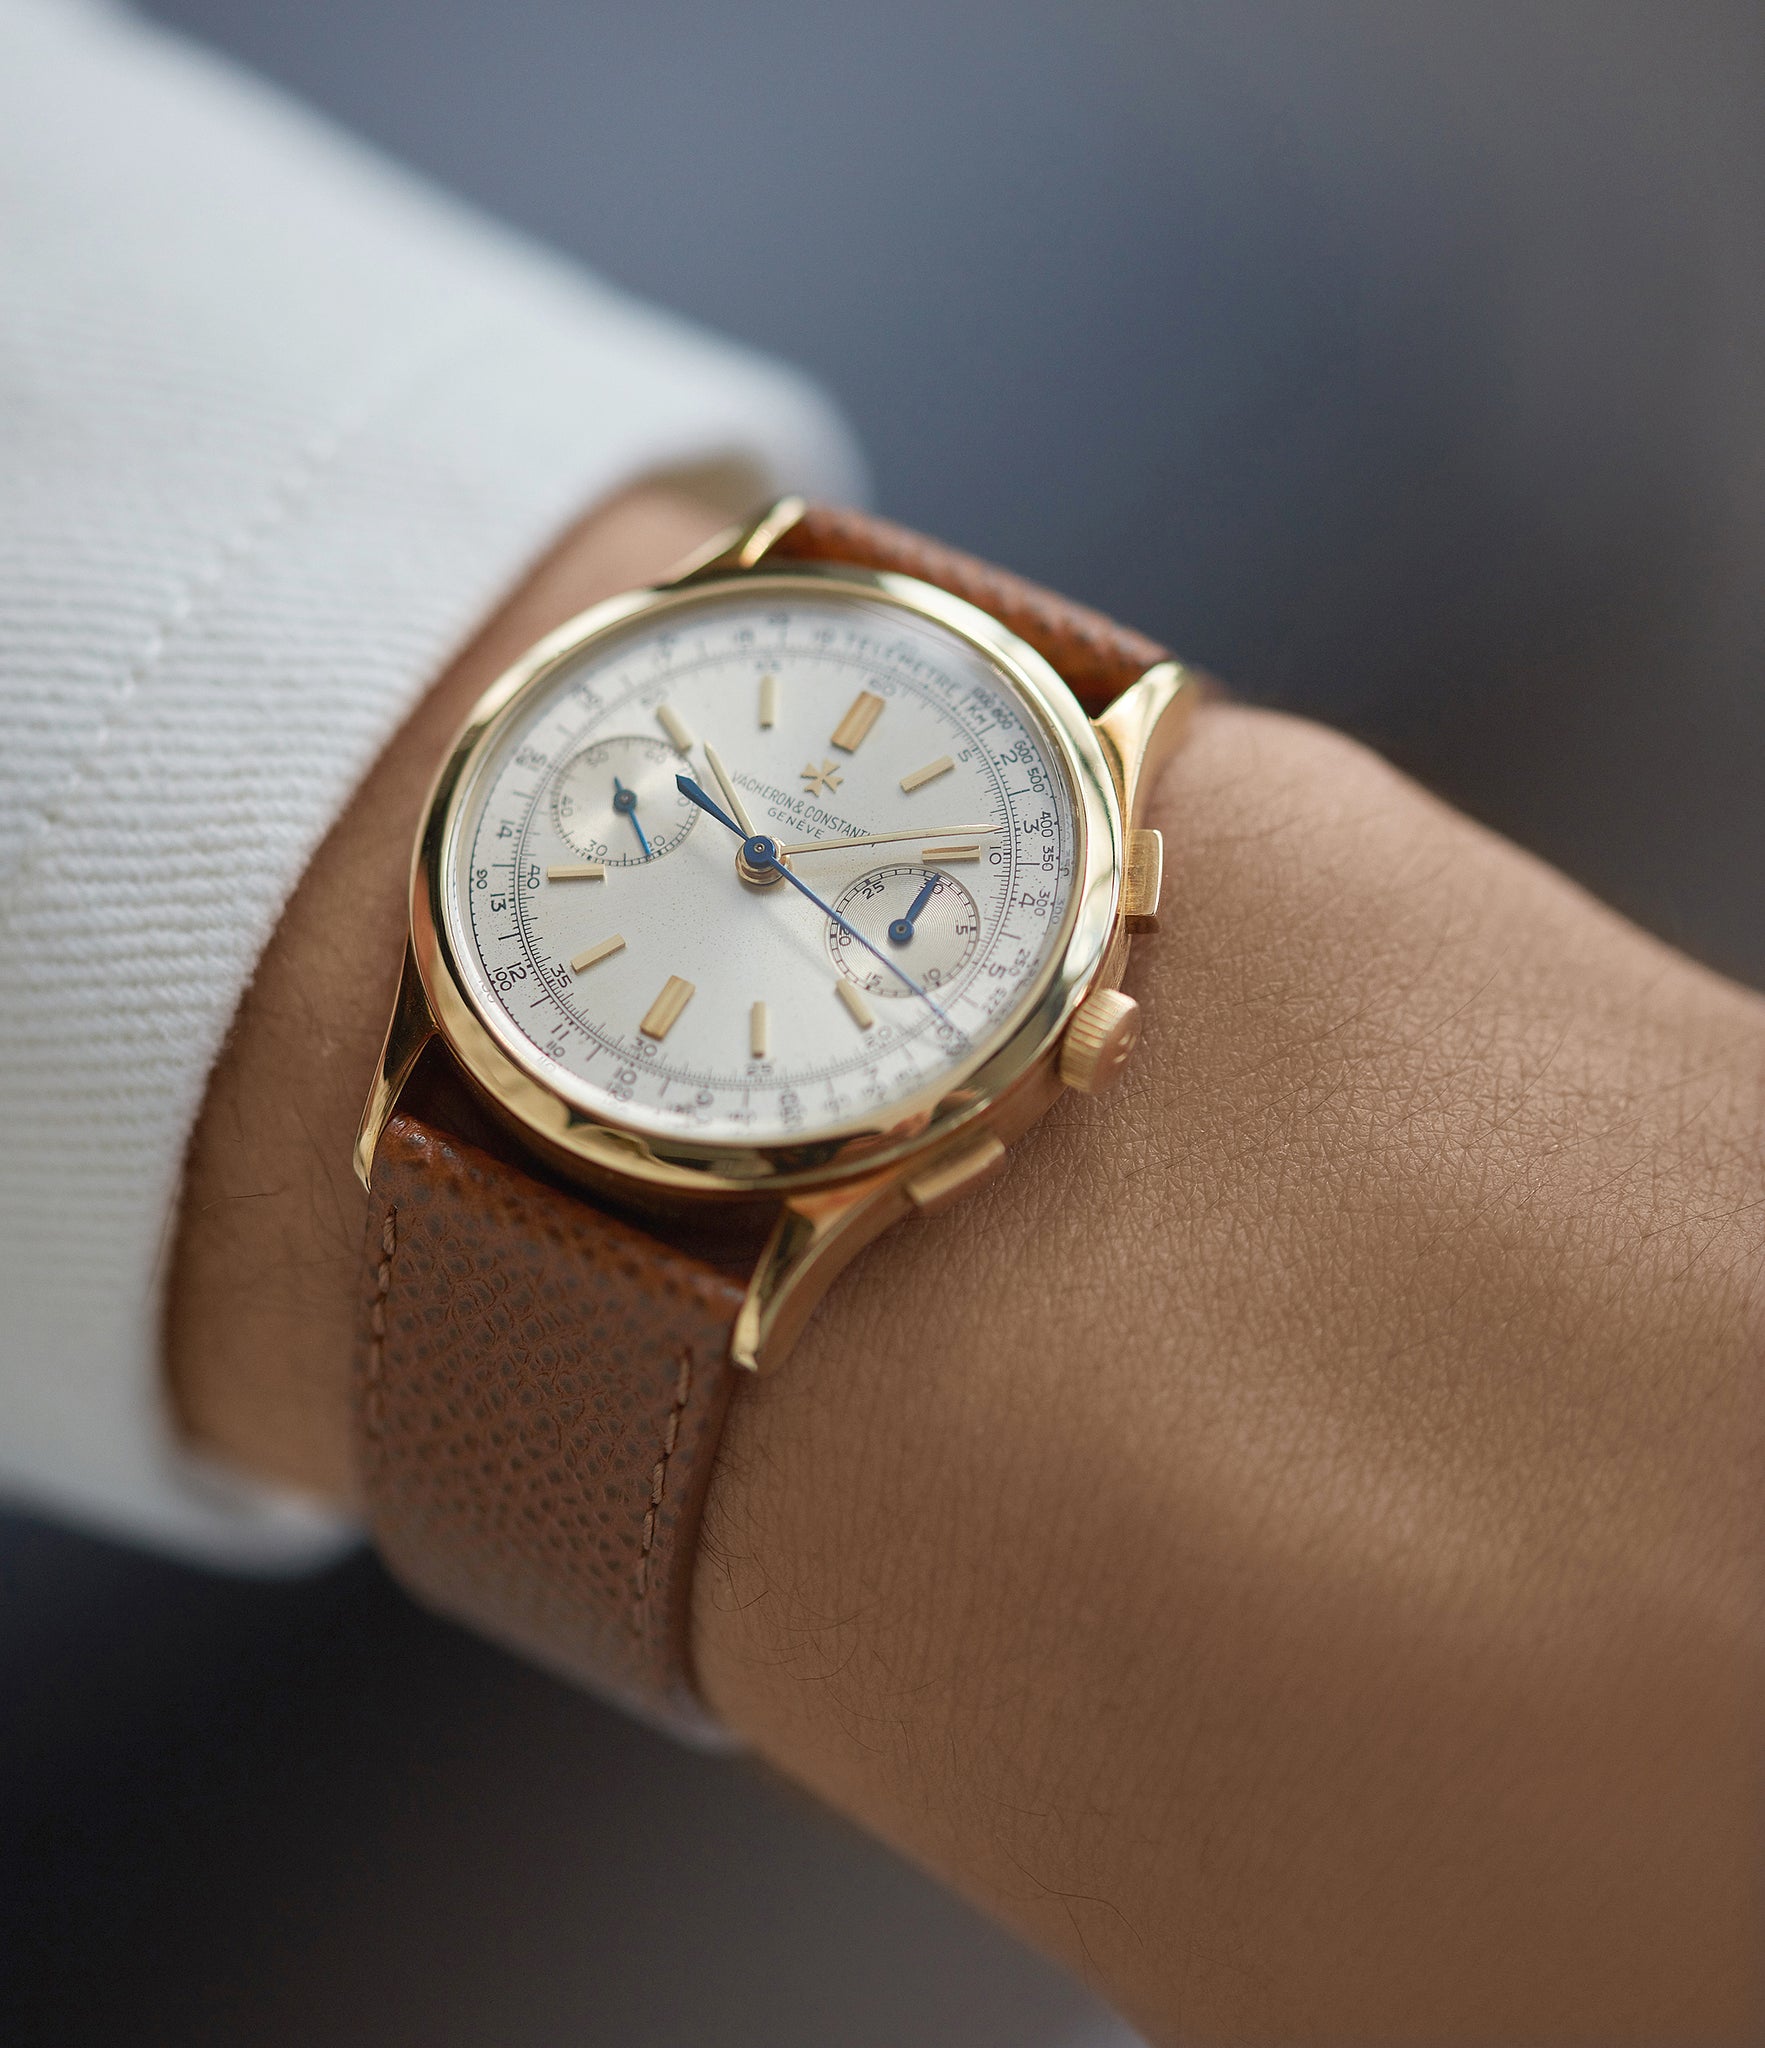 wristwatch Vacheron Constantin Chronograph Ref. 4072 yellow gold rare vintage dress watch for sale A Collected Man London British specialist rare watches